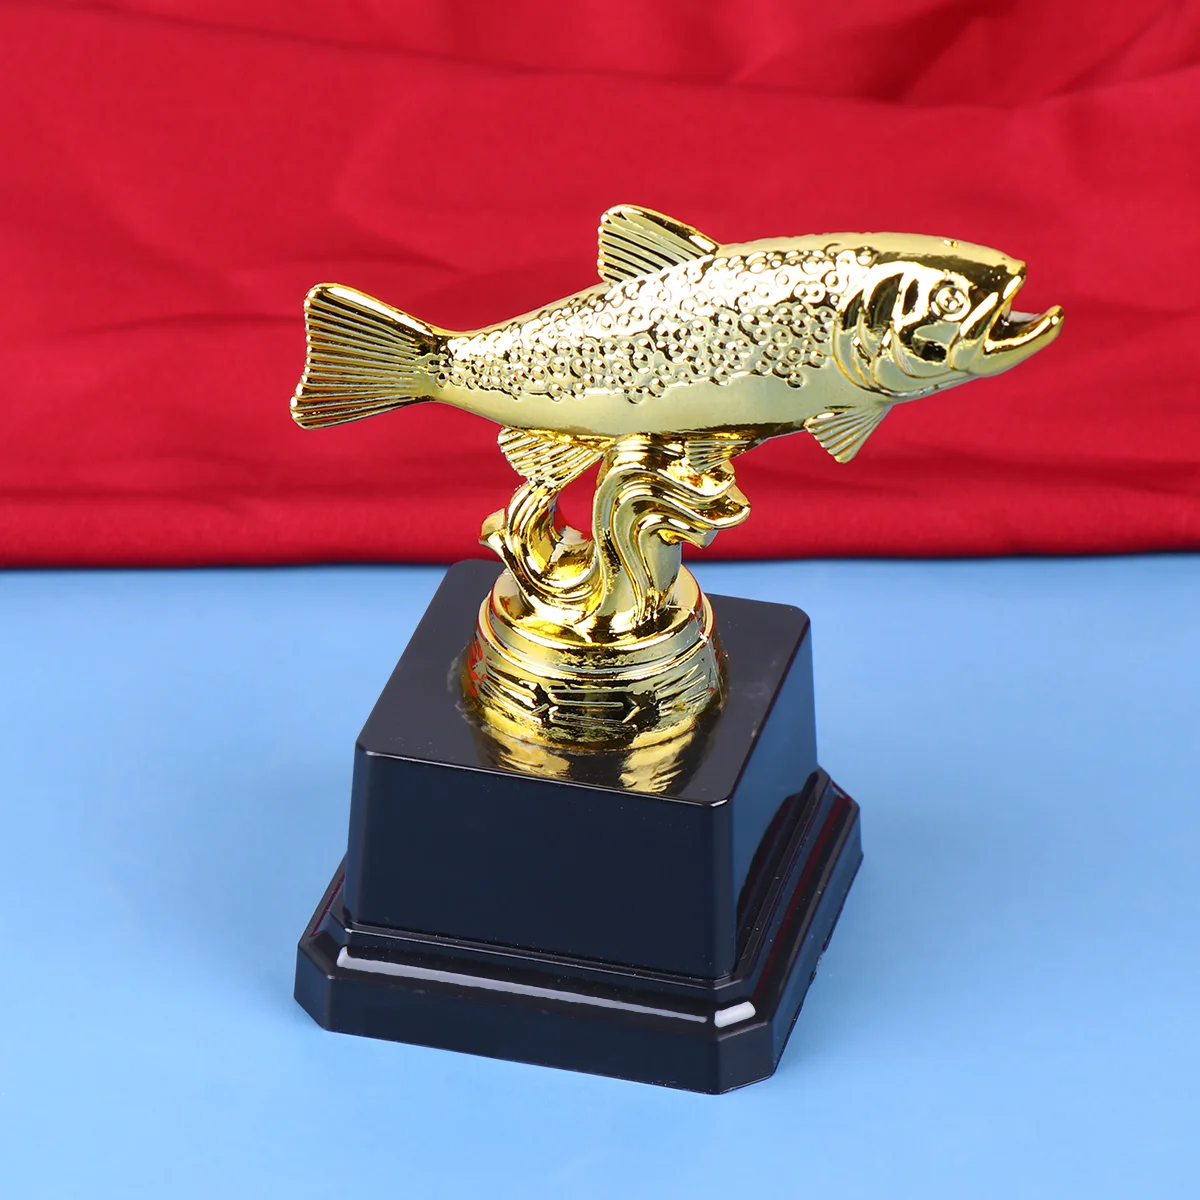 https://ae01.alicdn.com/kf/S599c7488a2ef425b8aea34c5a8e019f4p/Trophy-Award-Cup-Kids-Trophies-Fish-Prize-Fishing-Party-Winning-Gold-Statues-Football-Basketball-Achievement-Creative.jpg